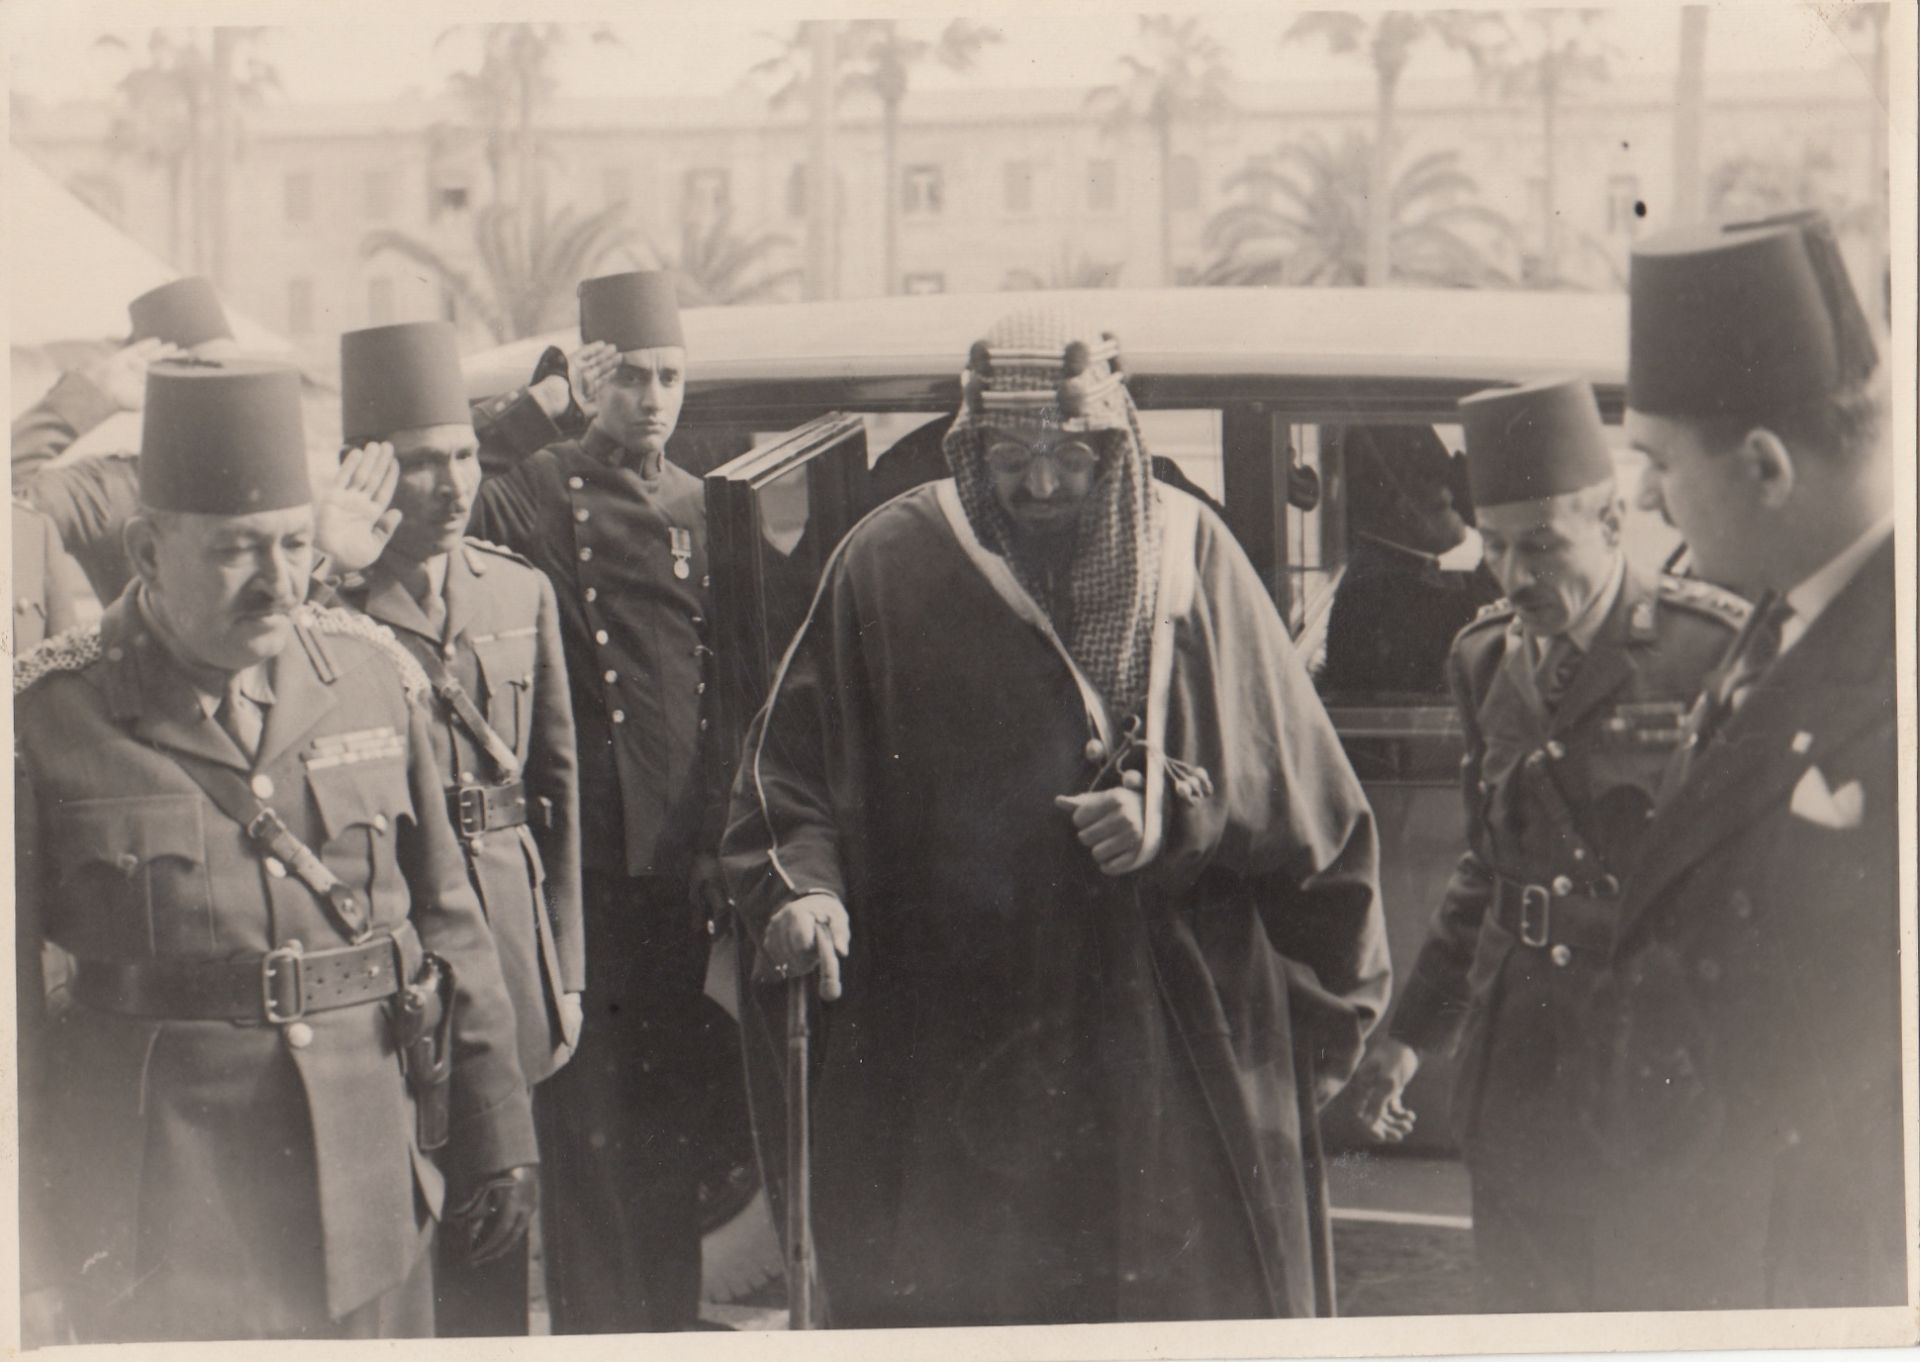 FIVE RARE PHOTOGRAPHS OF KING ABDUL AL-AZIZ AL SAUD DURING HIS REALM, PROBABLY 1930-1940 - Image 5 of 10